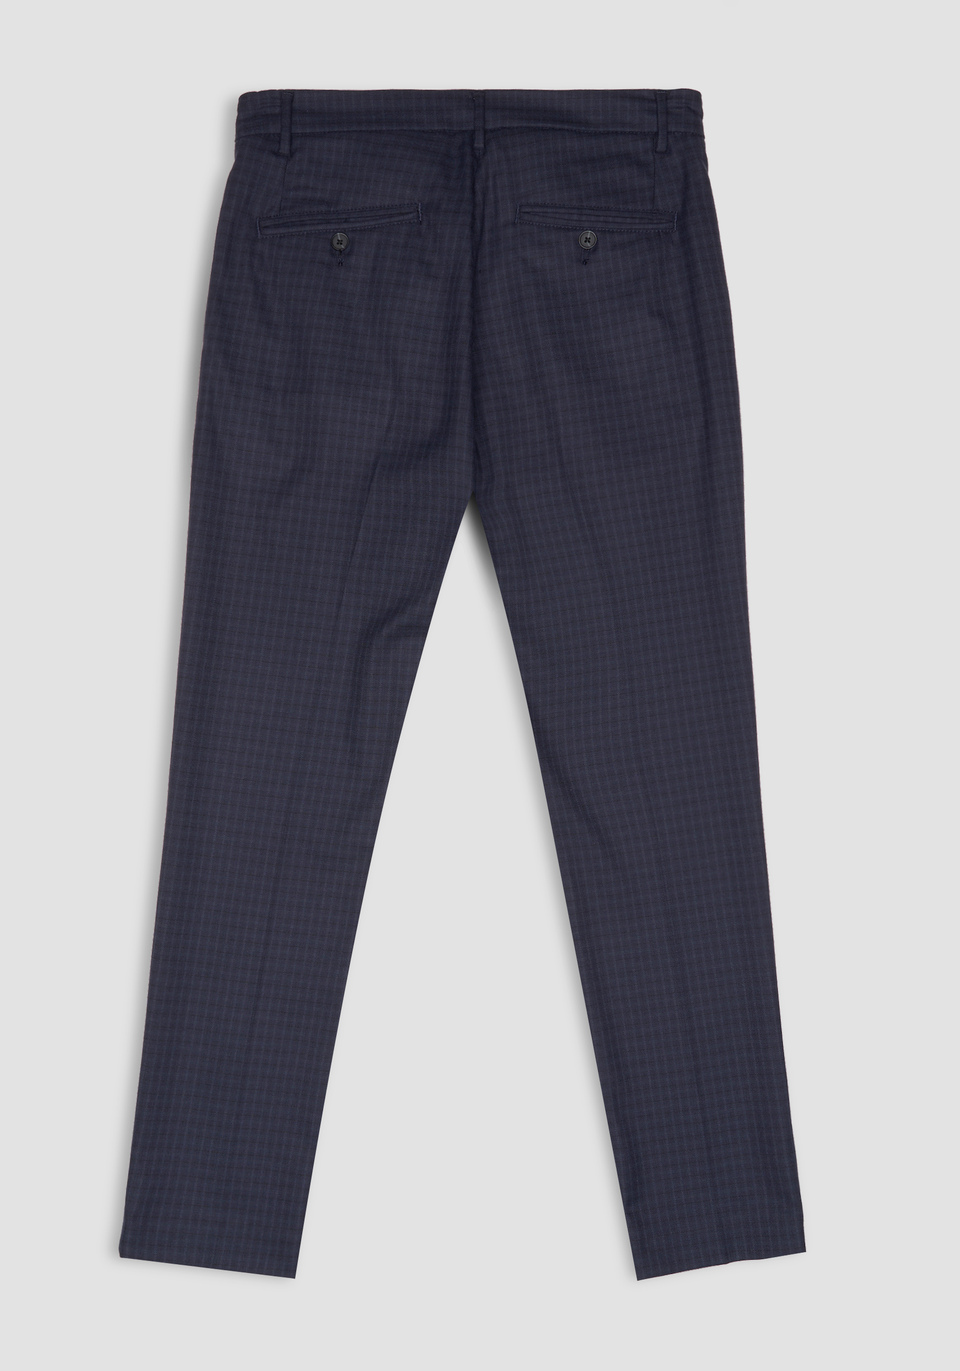 CARROT-FIT “QUENTIN” TROUSERS WITH A MICRO CHECK PATTERN - Antony Morato Online Shop